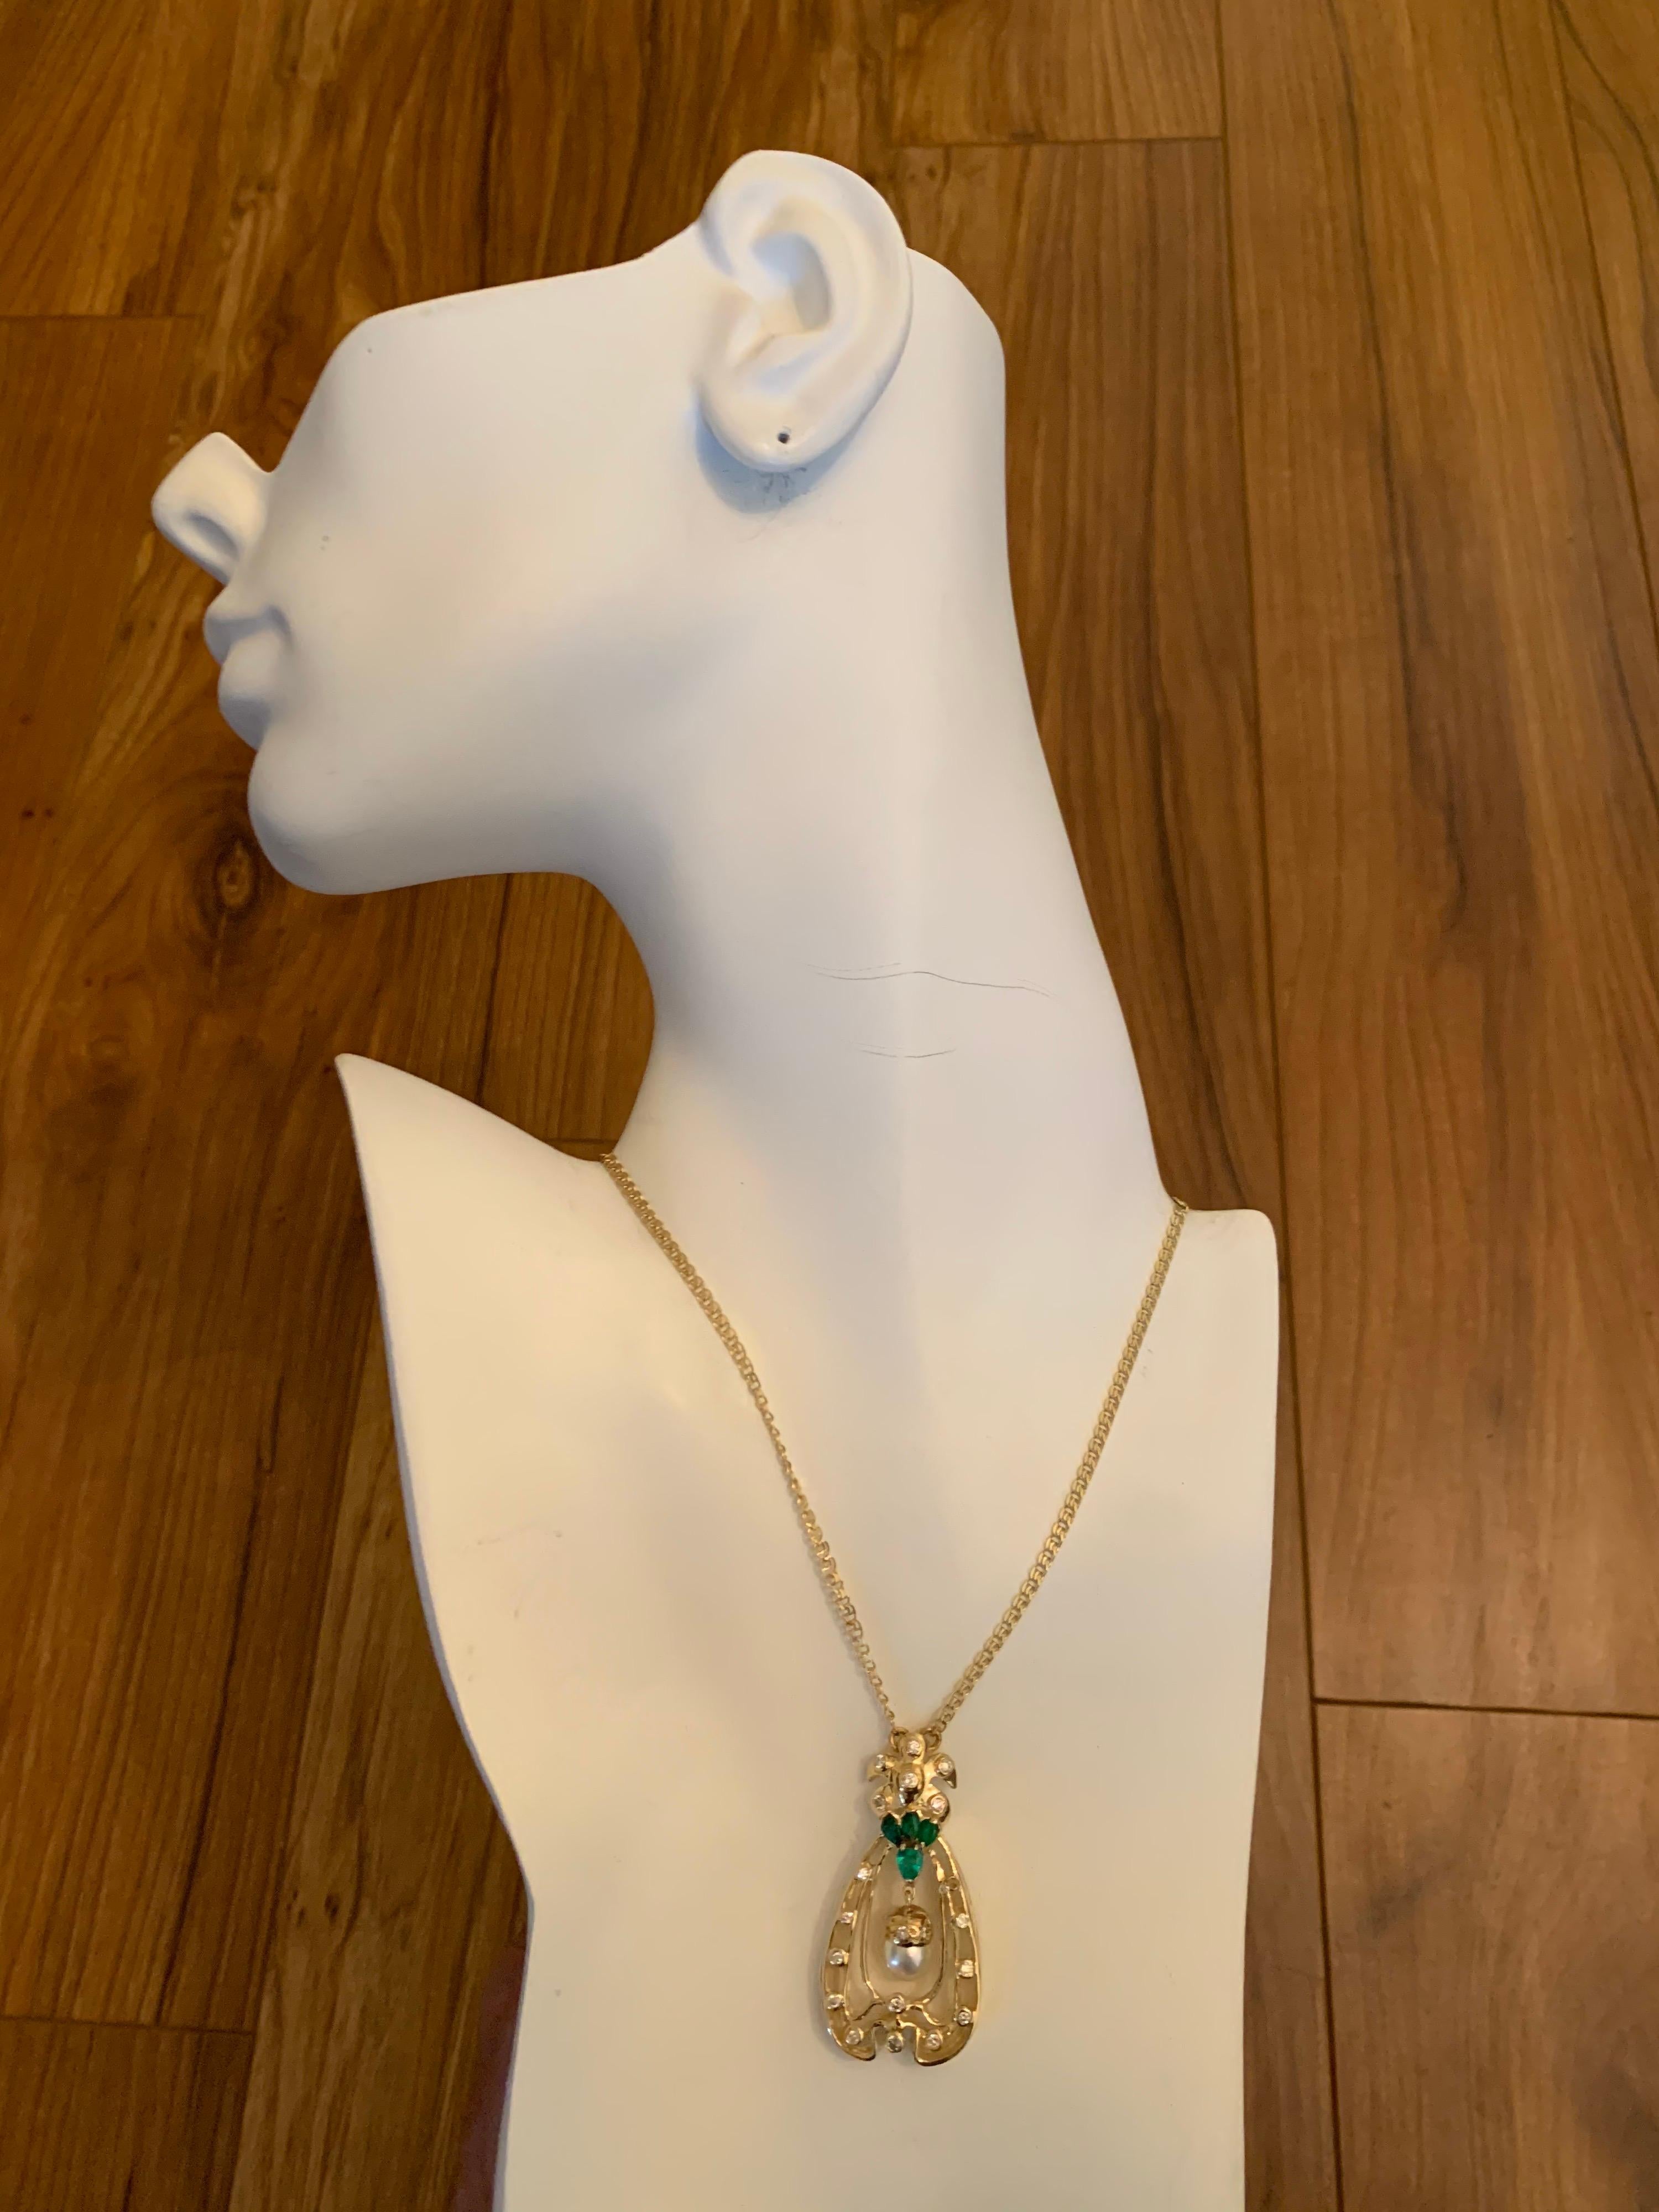 Retro 14k Yellow Gold Pendant 1.75 Carat (approx)  Natural Emerald & Diamond Circa 1960.

The piece itself weighs 19.7 grams and the attached chain is 16